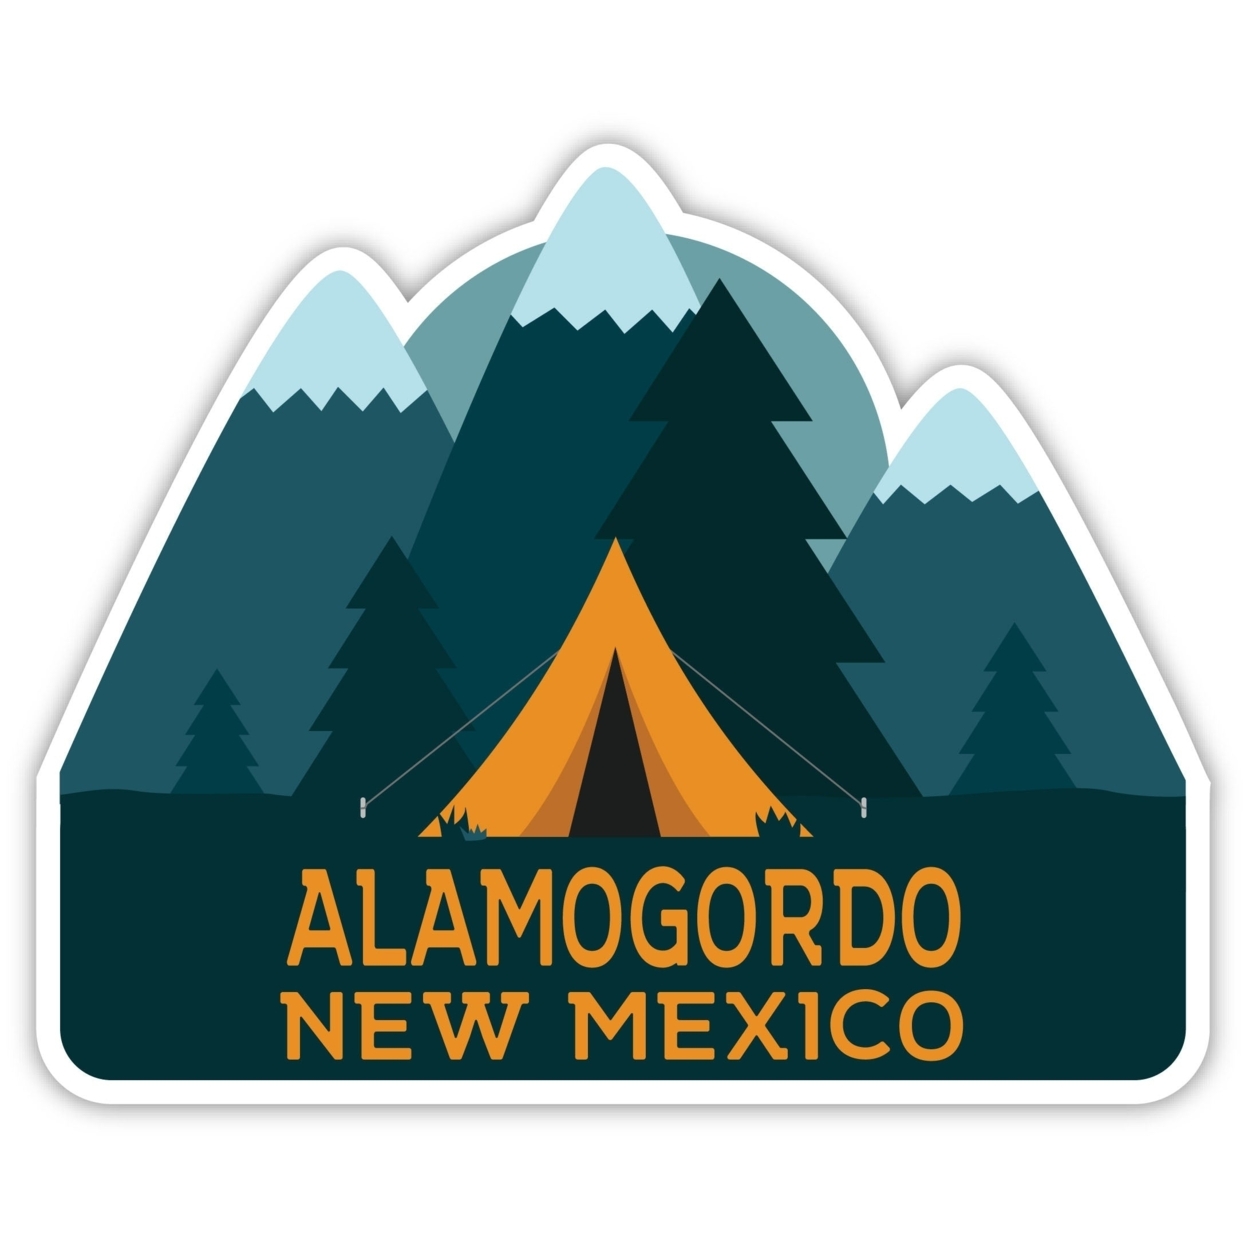 Alamogordo New Mexico Souvenir Decorative Stickers (Choose Theme And Size) - 4-Pack, 2-Inch, Adventures Awaits